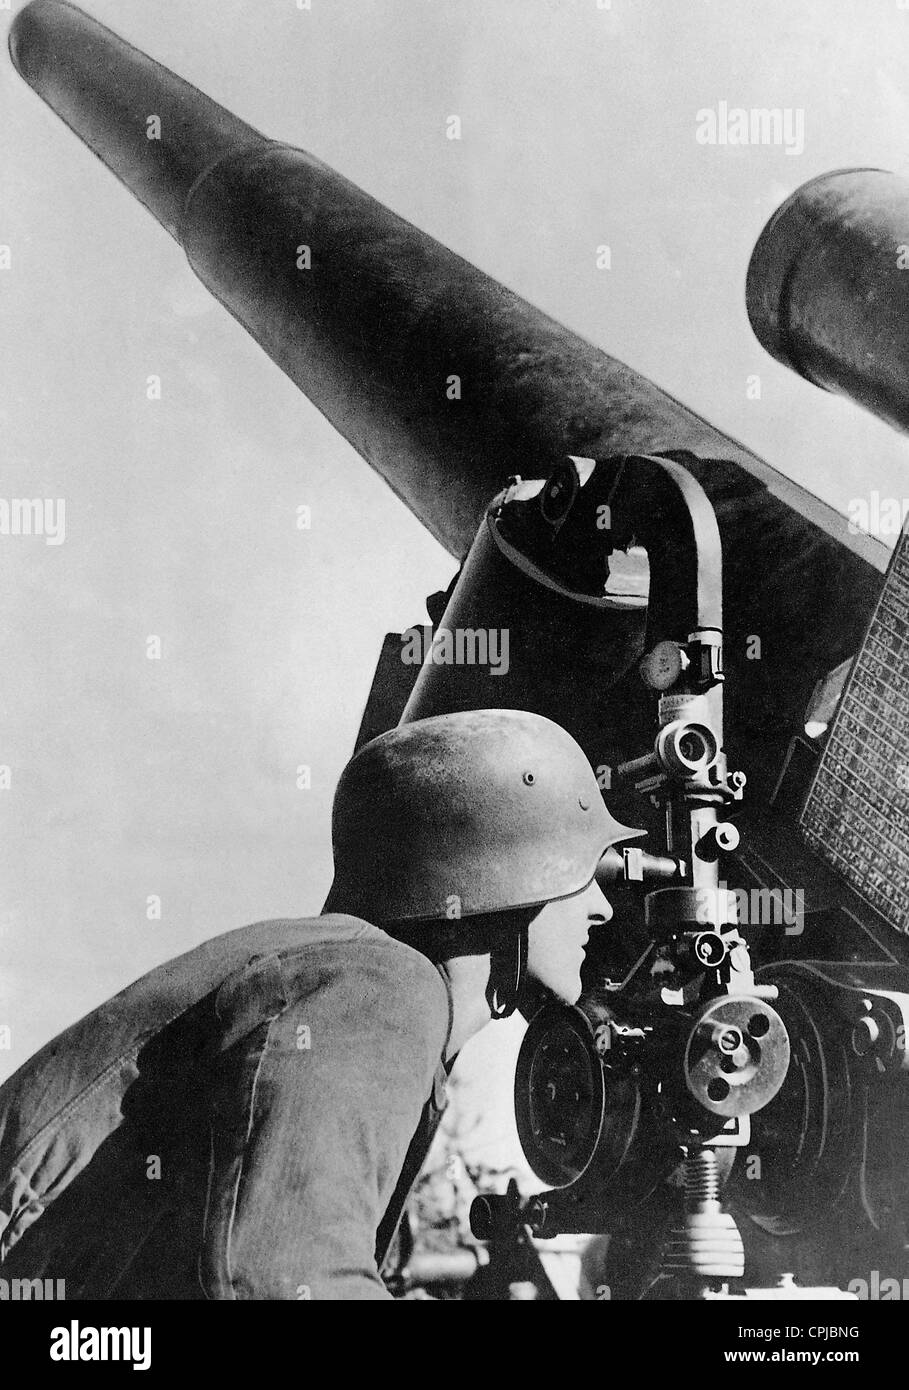 German 21 cm mortar in WWII on the Eastern front, 1944 Stock Photo